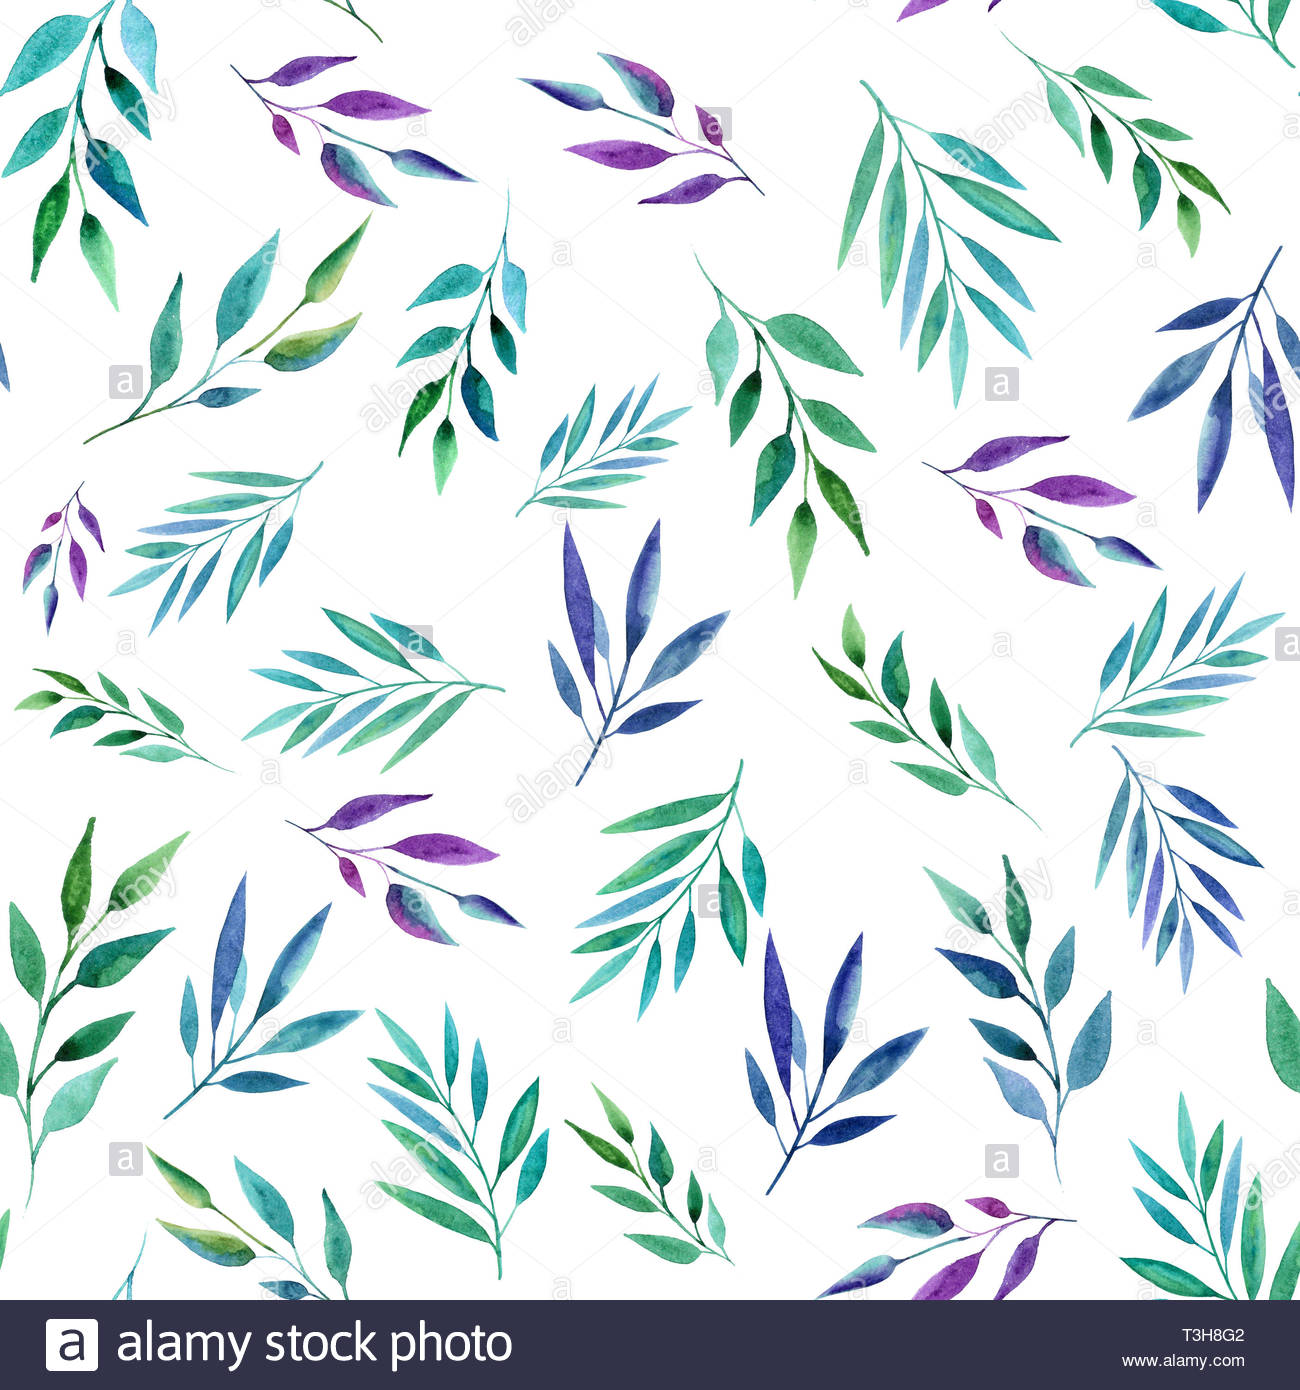 Abstract color branches seamless pattern Watercolor illustration